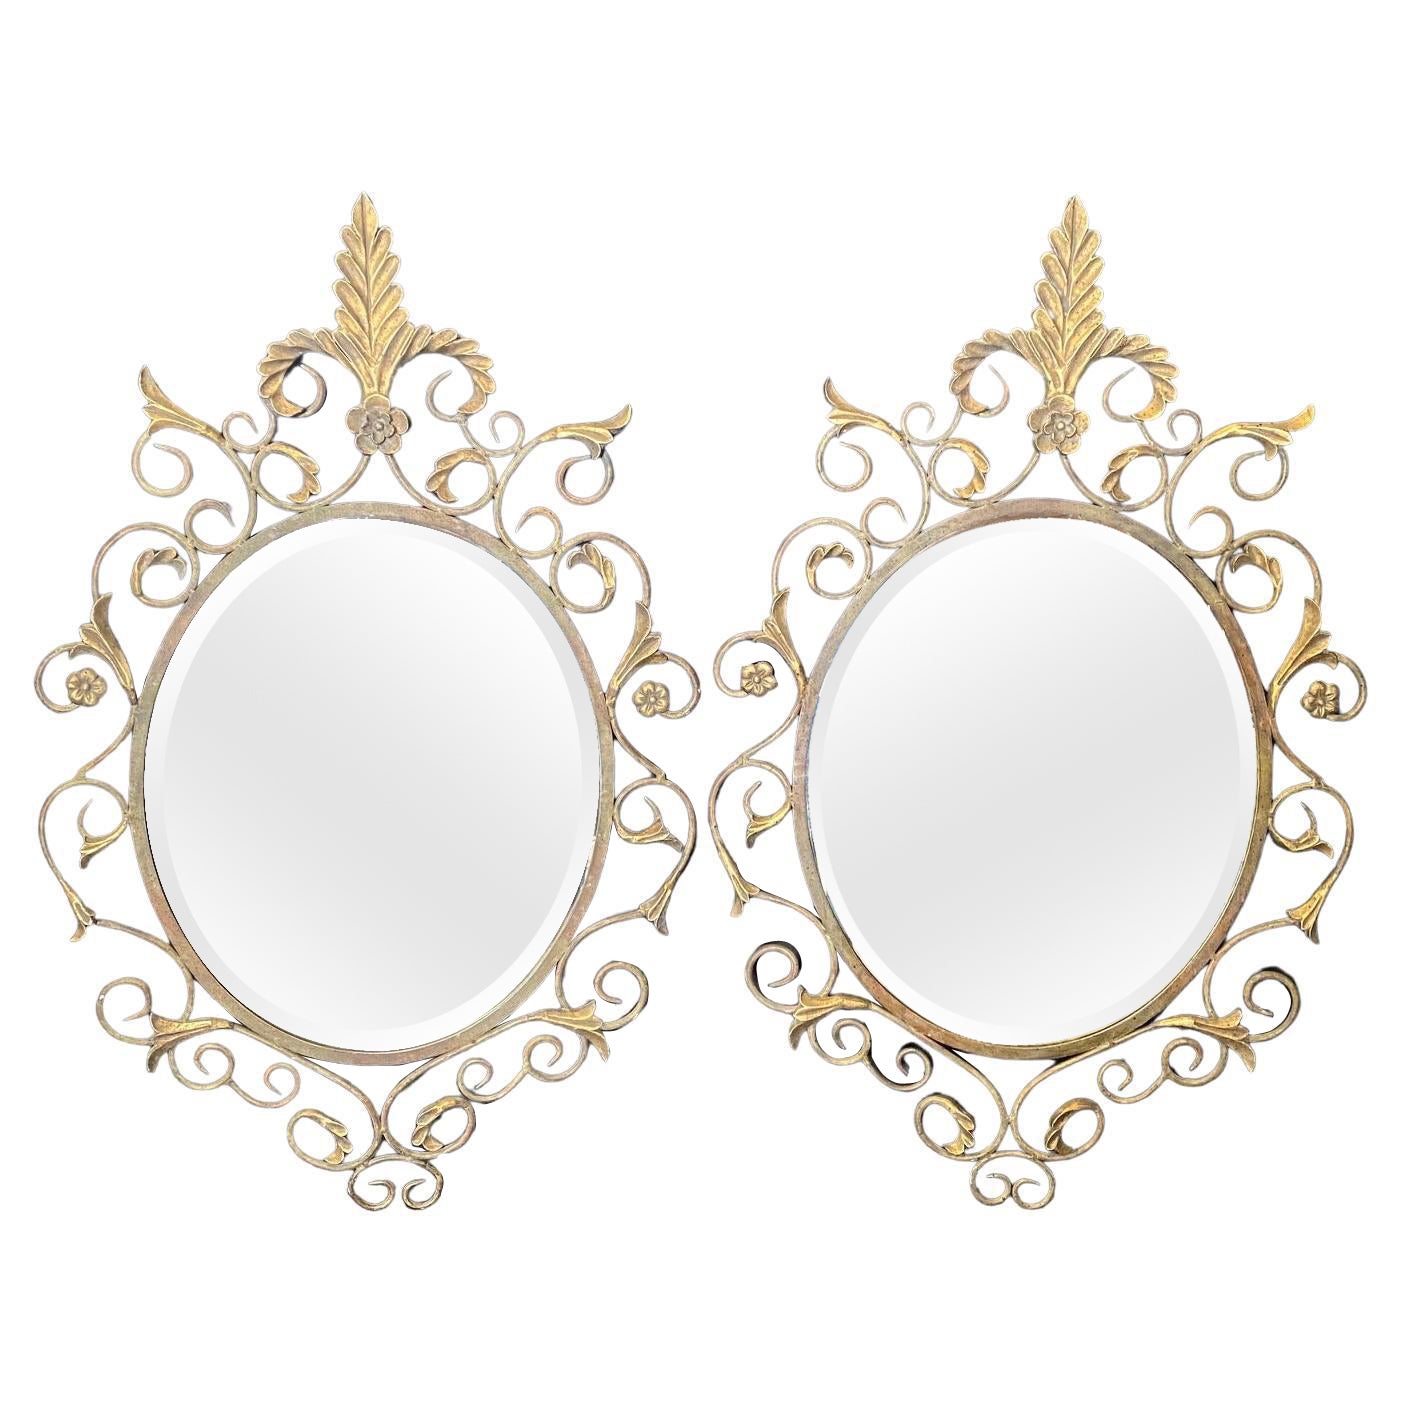 Pair of French Mid Century Fleur de Lis Scrolled Oval Beveled Wall Mirrors For Sale